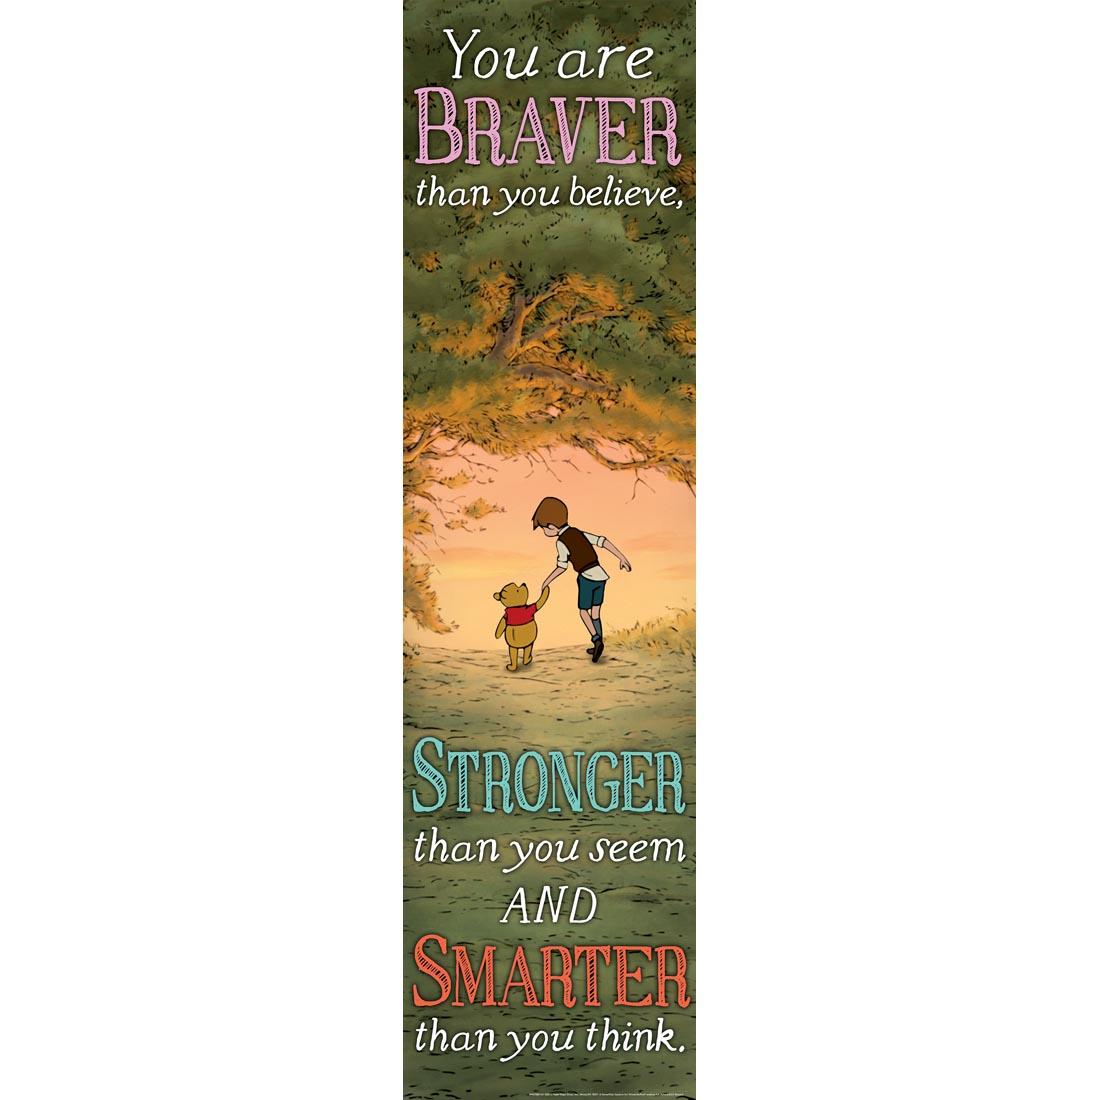 Winnie The Pooh Banner by Eureka with the saying You are braver than you believe, stronger than you seem and smarter than you think.